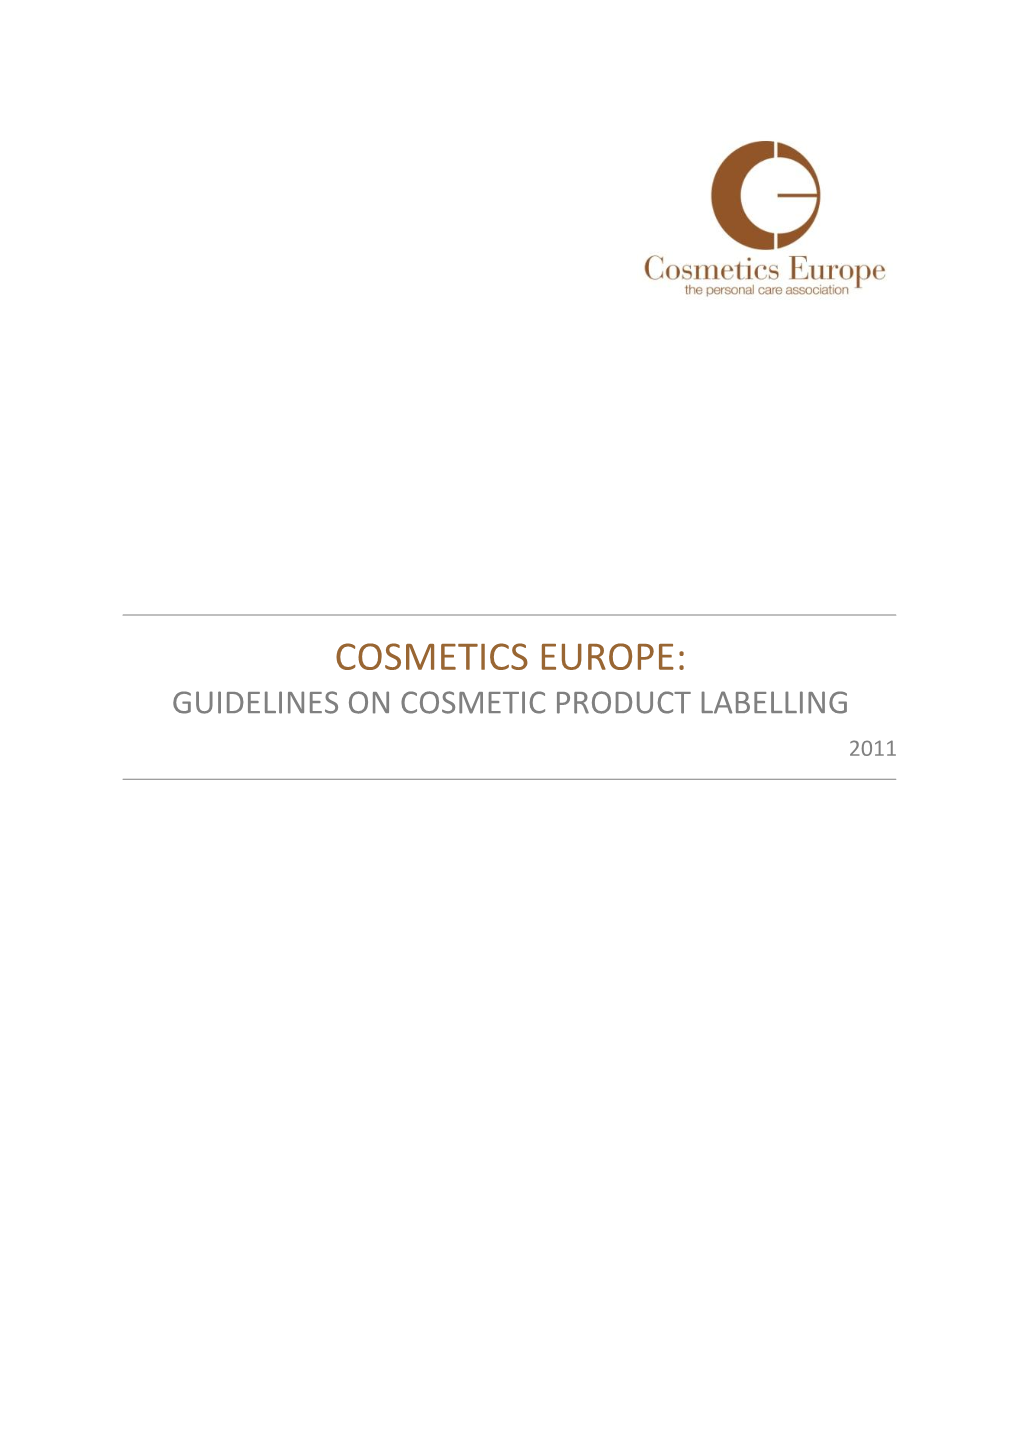 Guidelines on Cosmetic Product Labelling 2011